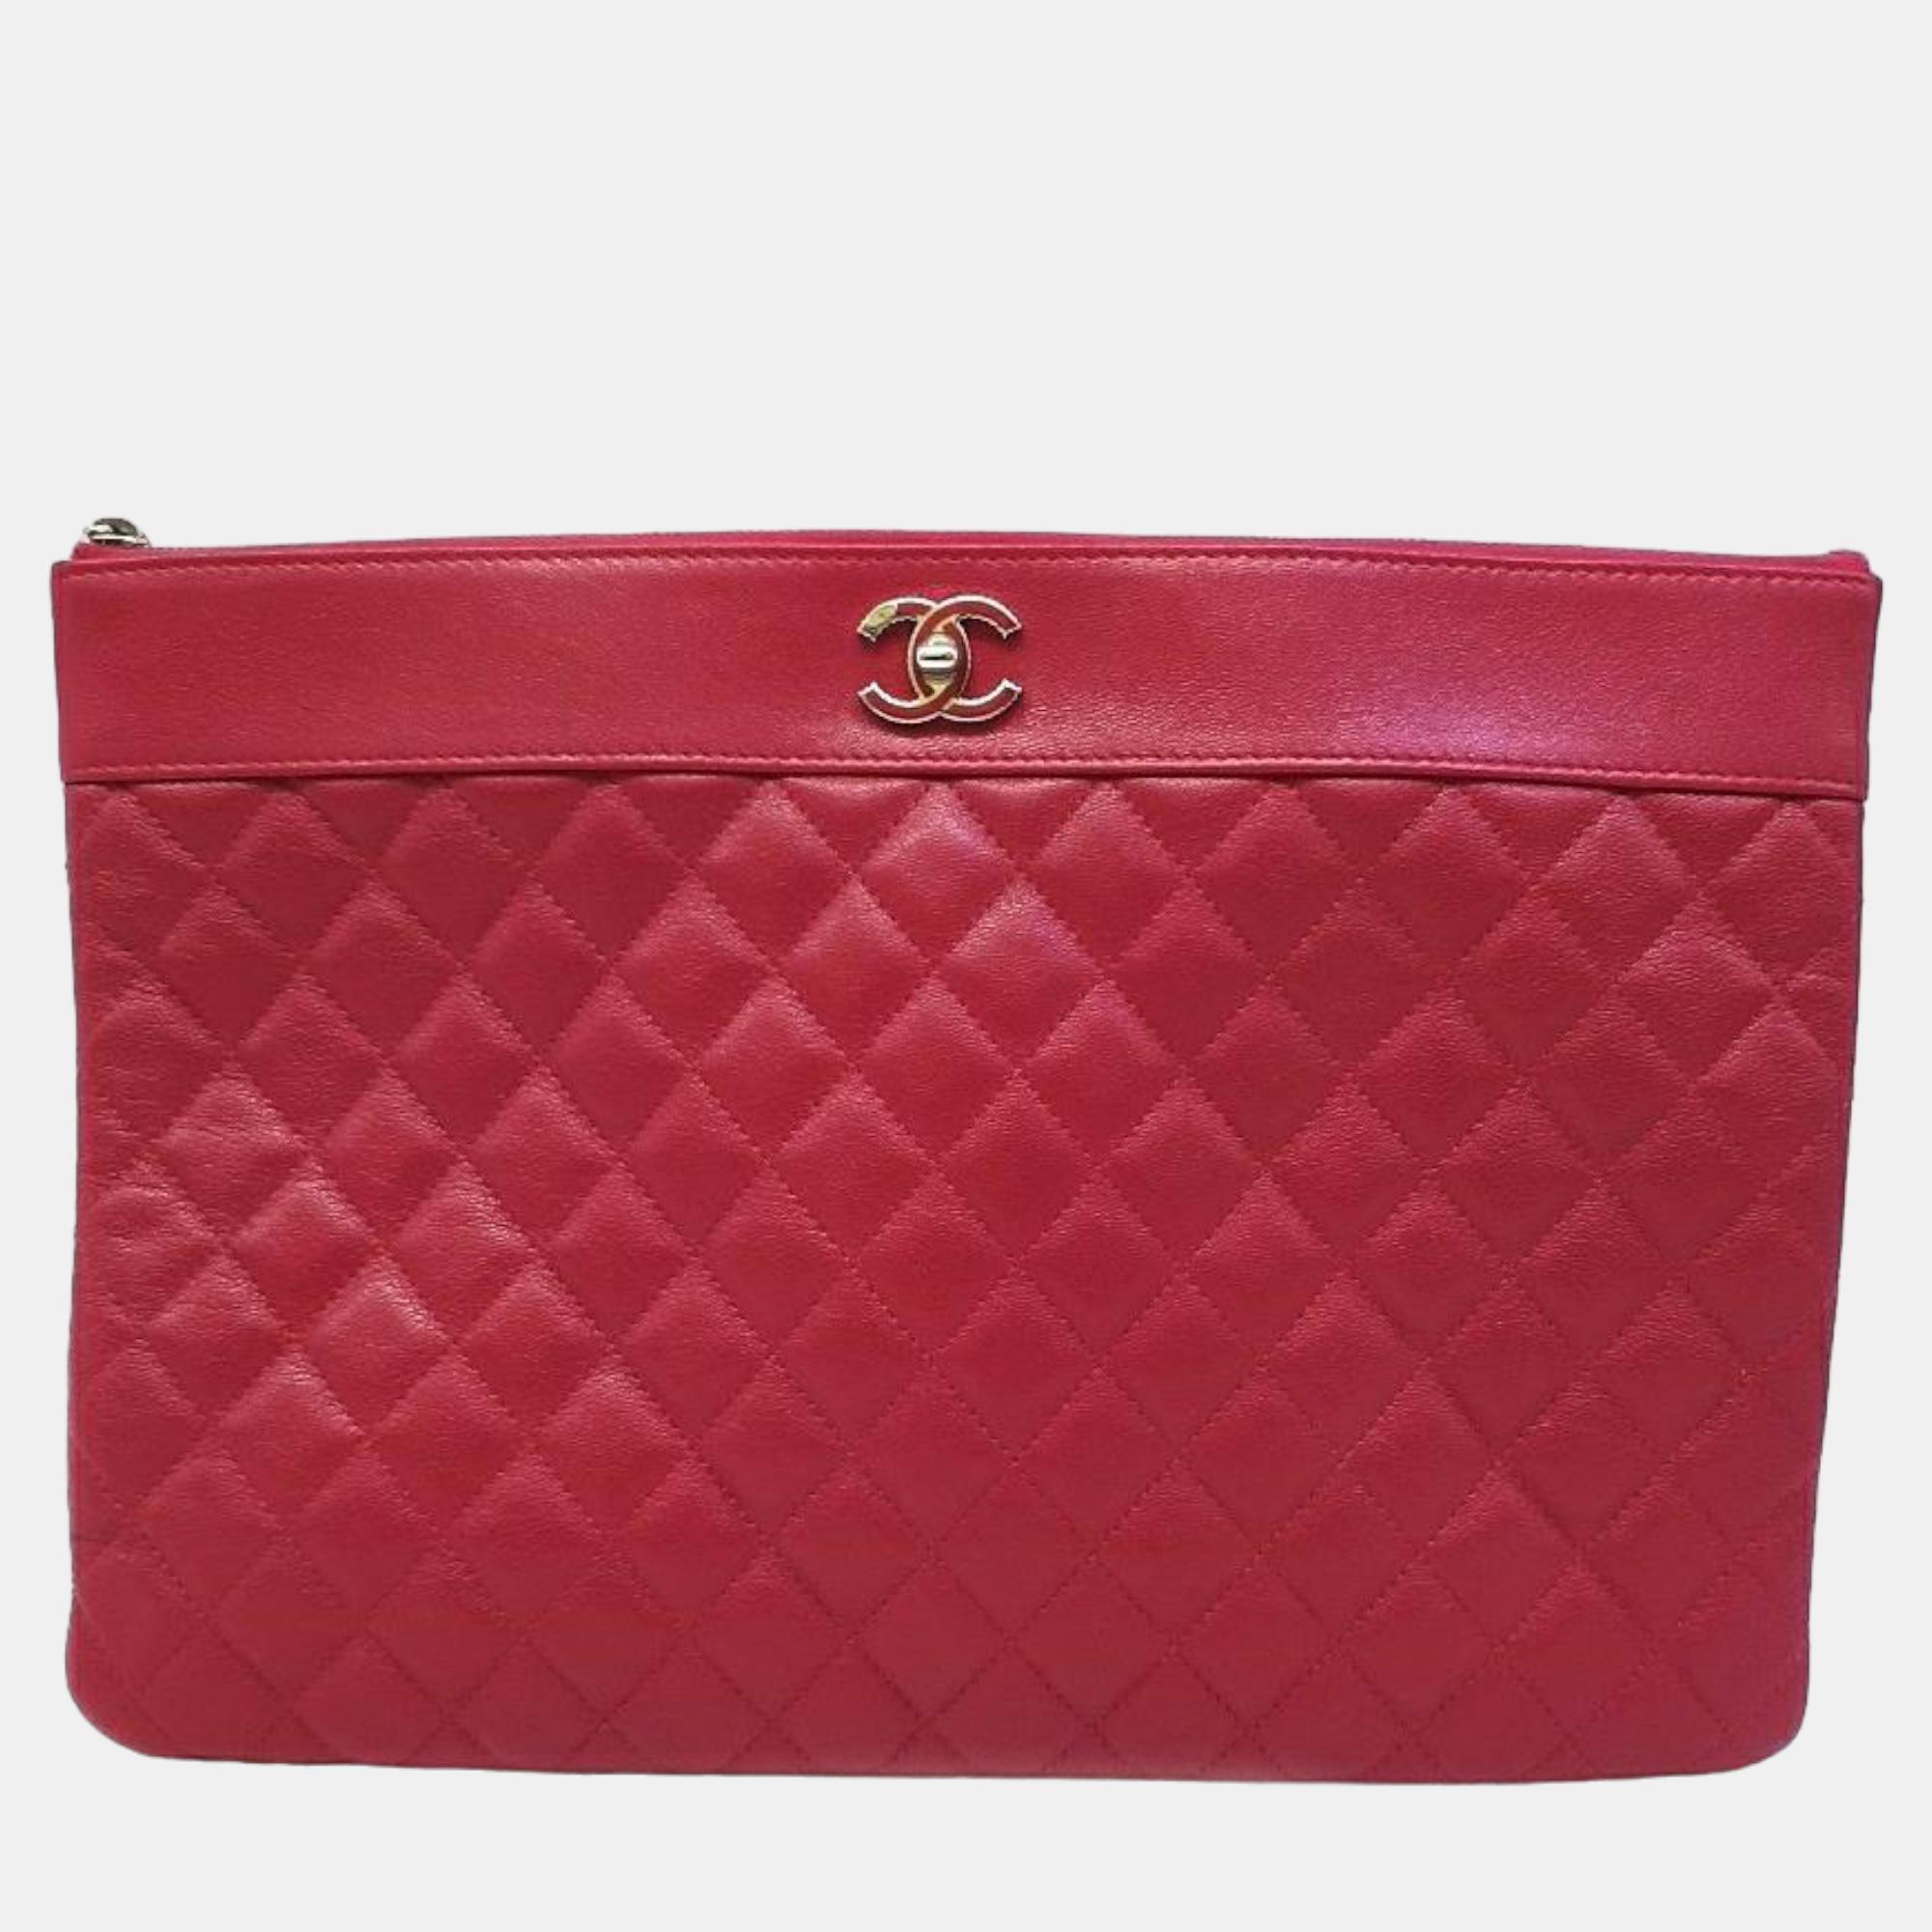 Chanel red leather mademoiselle cc clutch